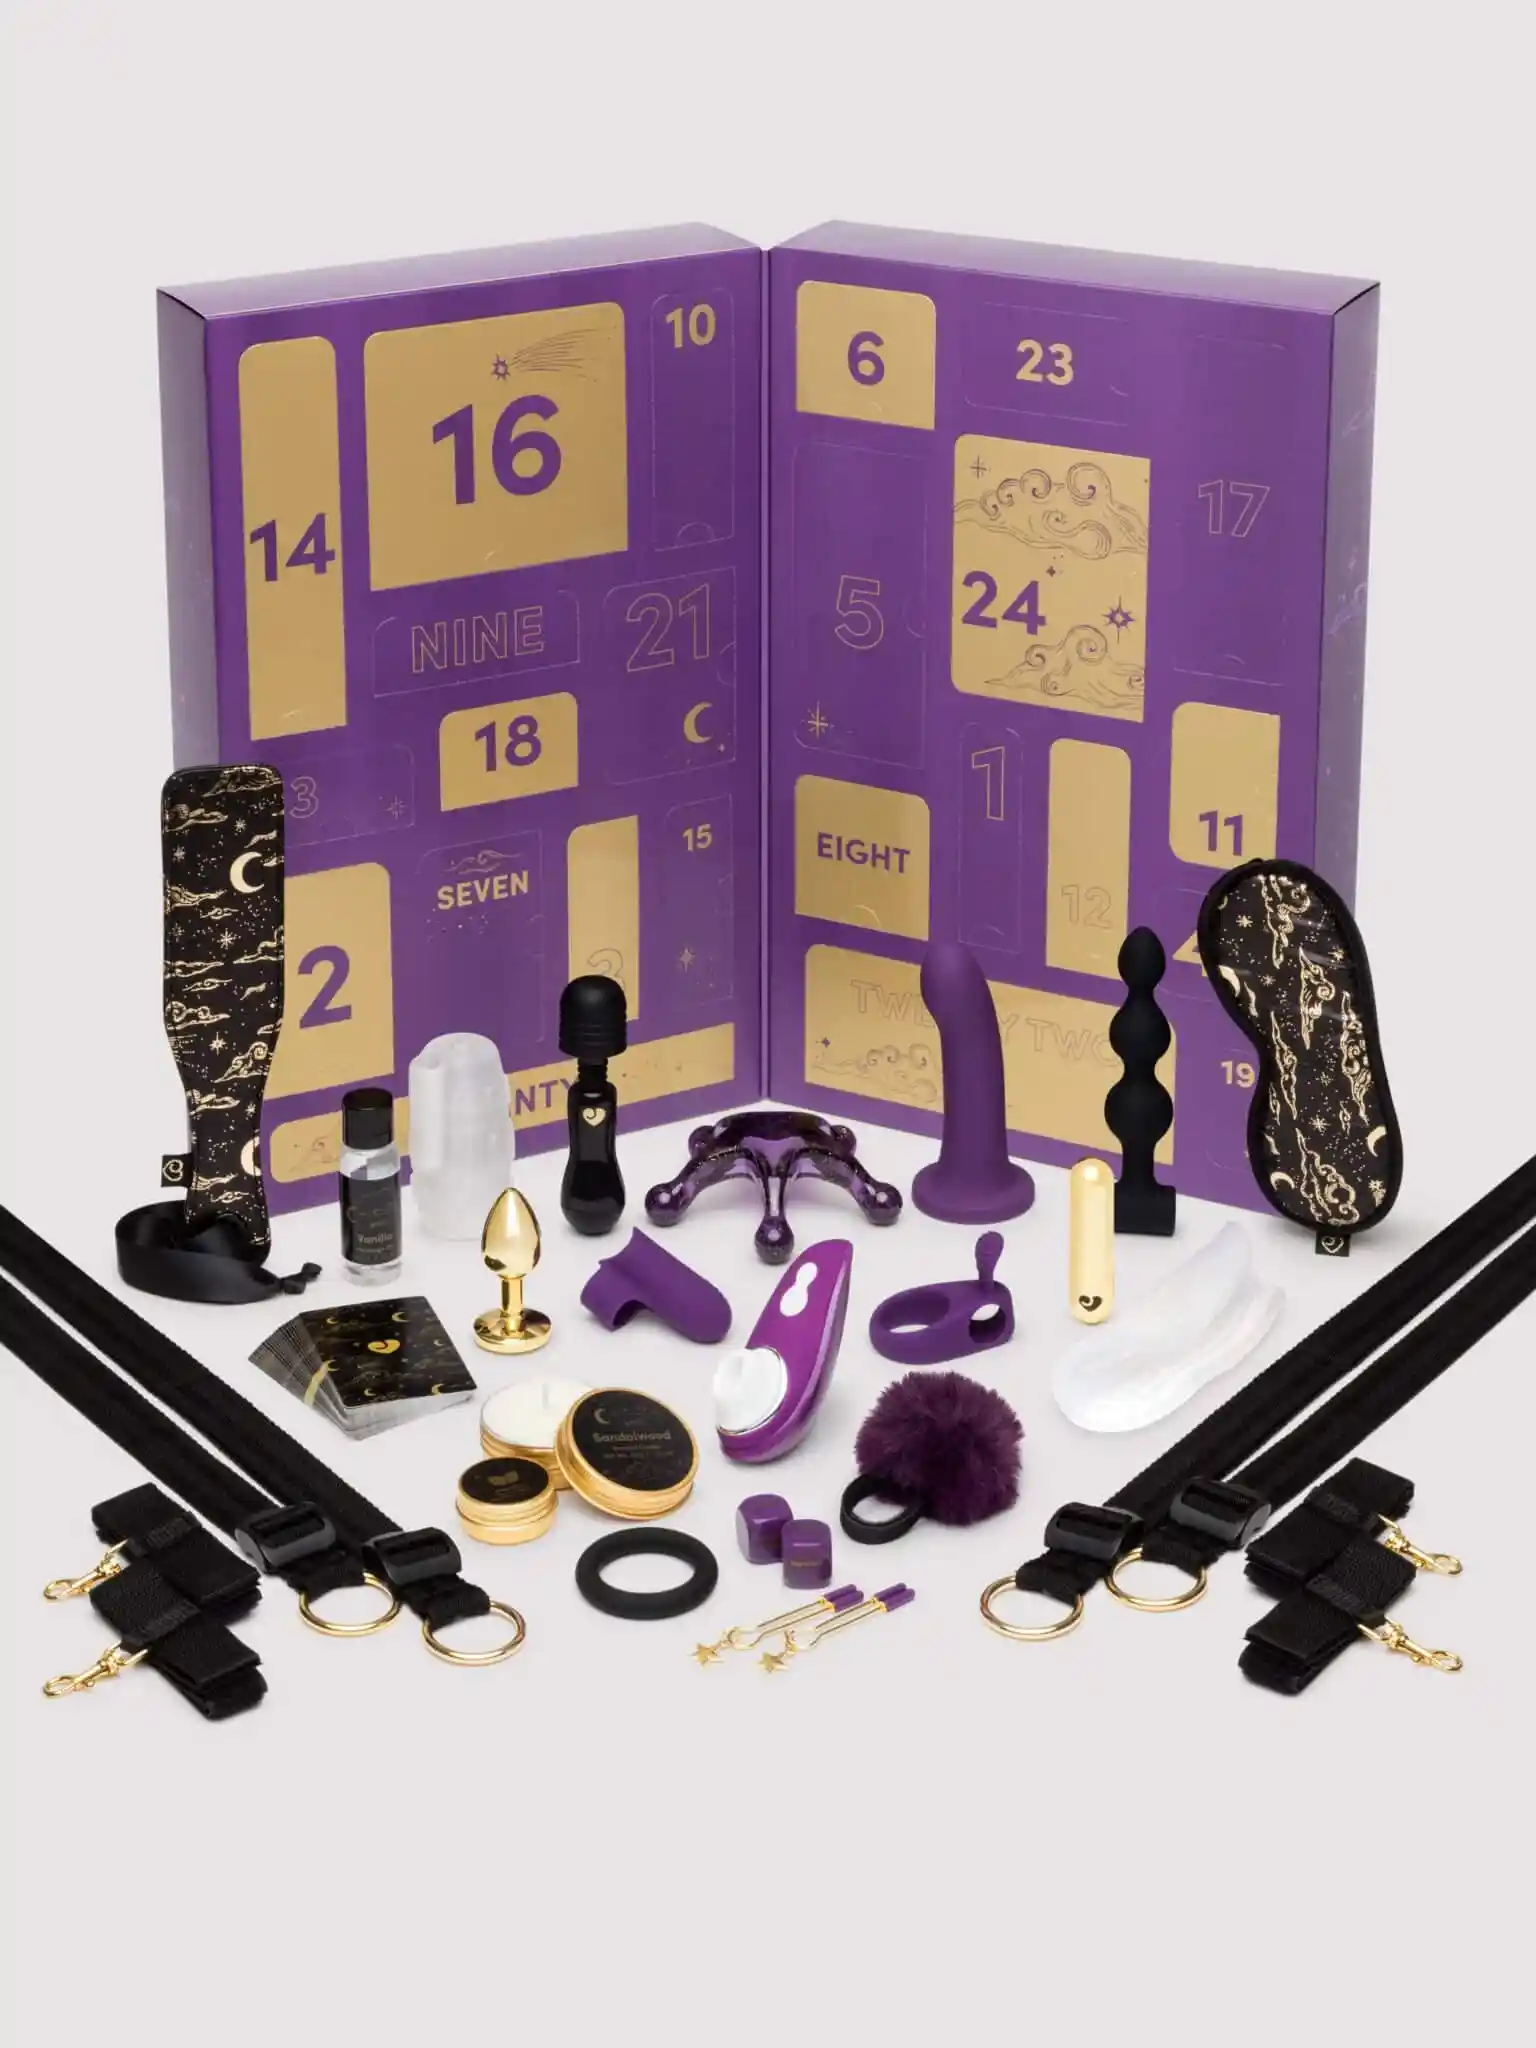 The Lovehoney x Womanizer Christmas advent calendar features 24 treats to open each day.